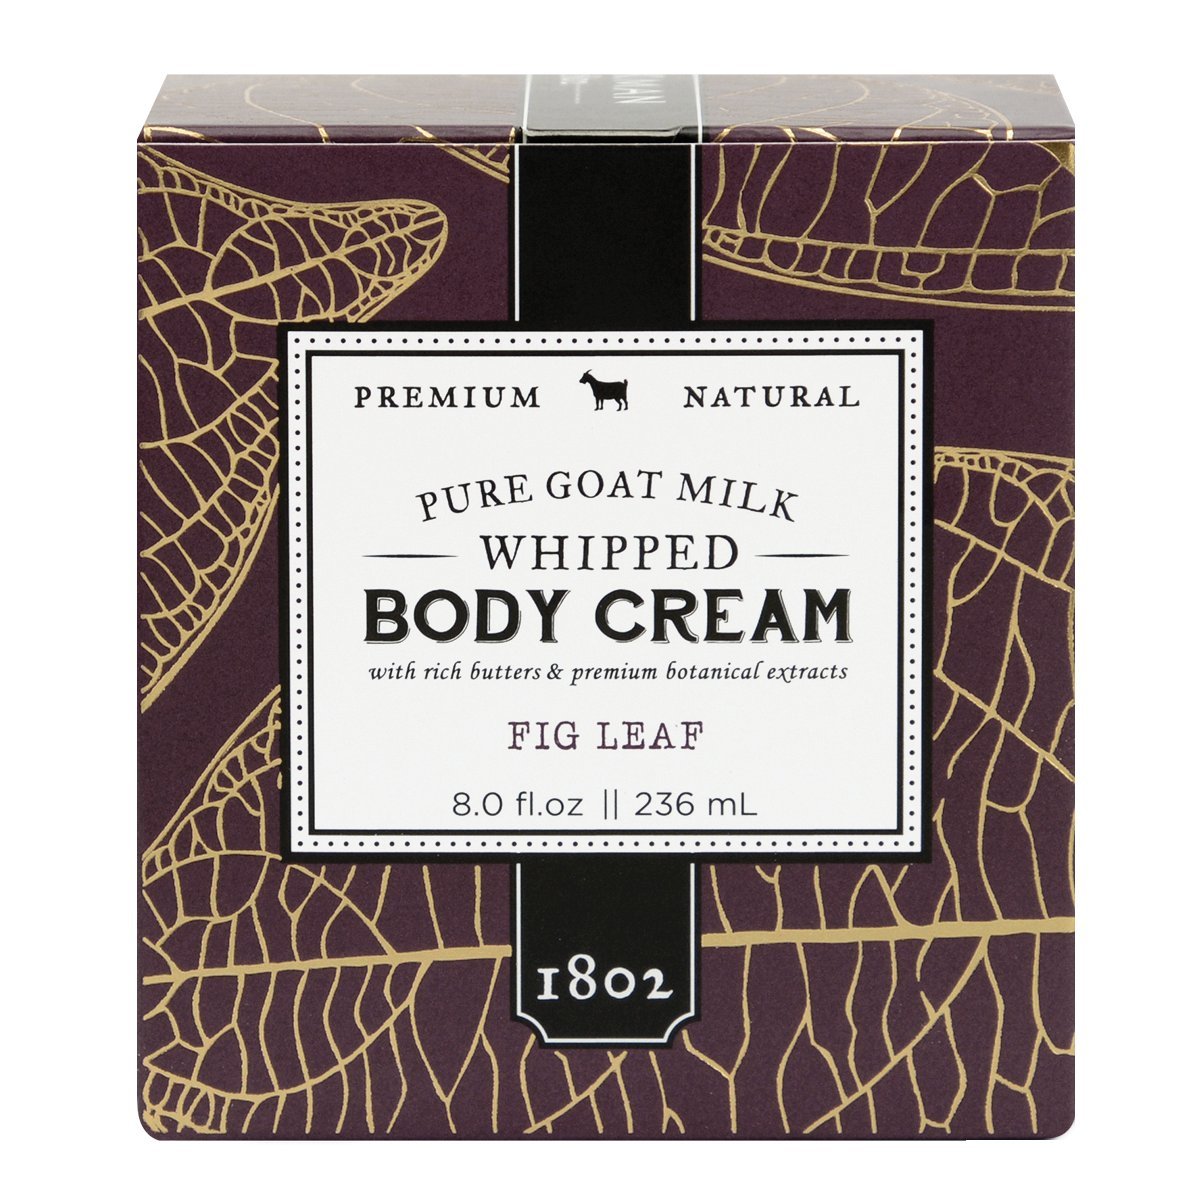 Beekman 1802 Fig Leaf Whipped Body Cream - 8.0 fl. oz. - The Finished Room